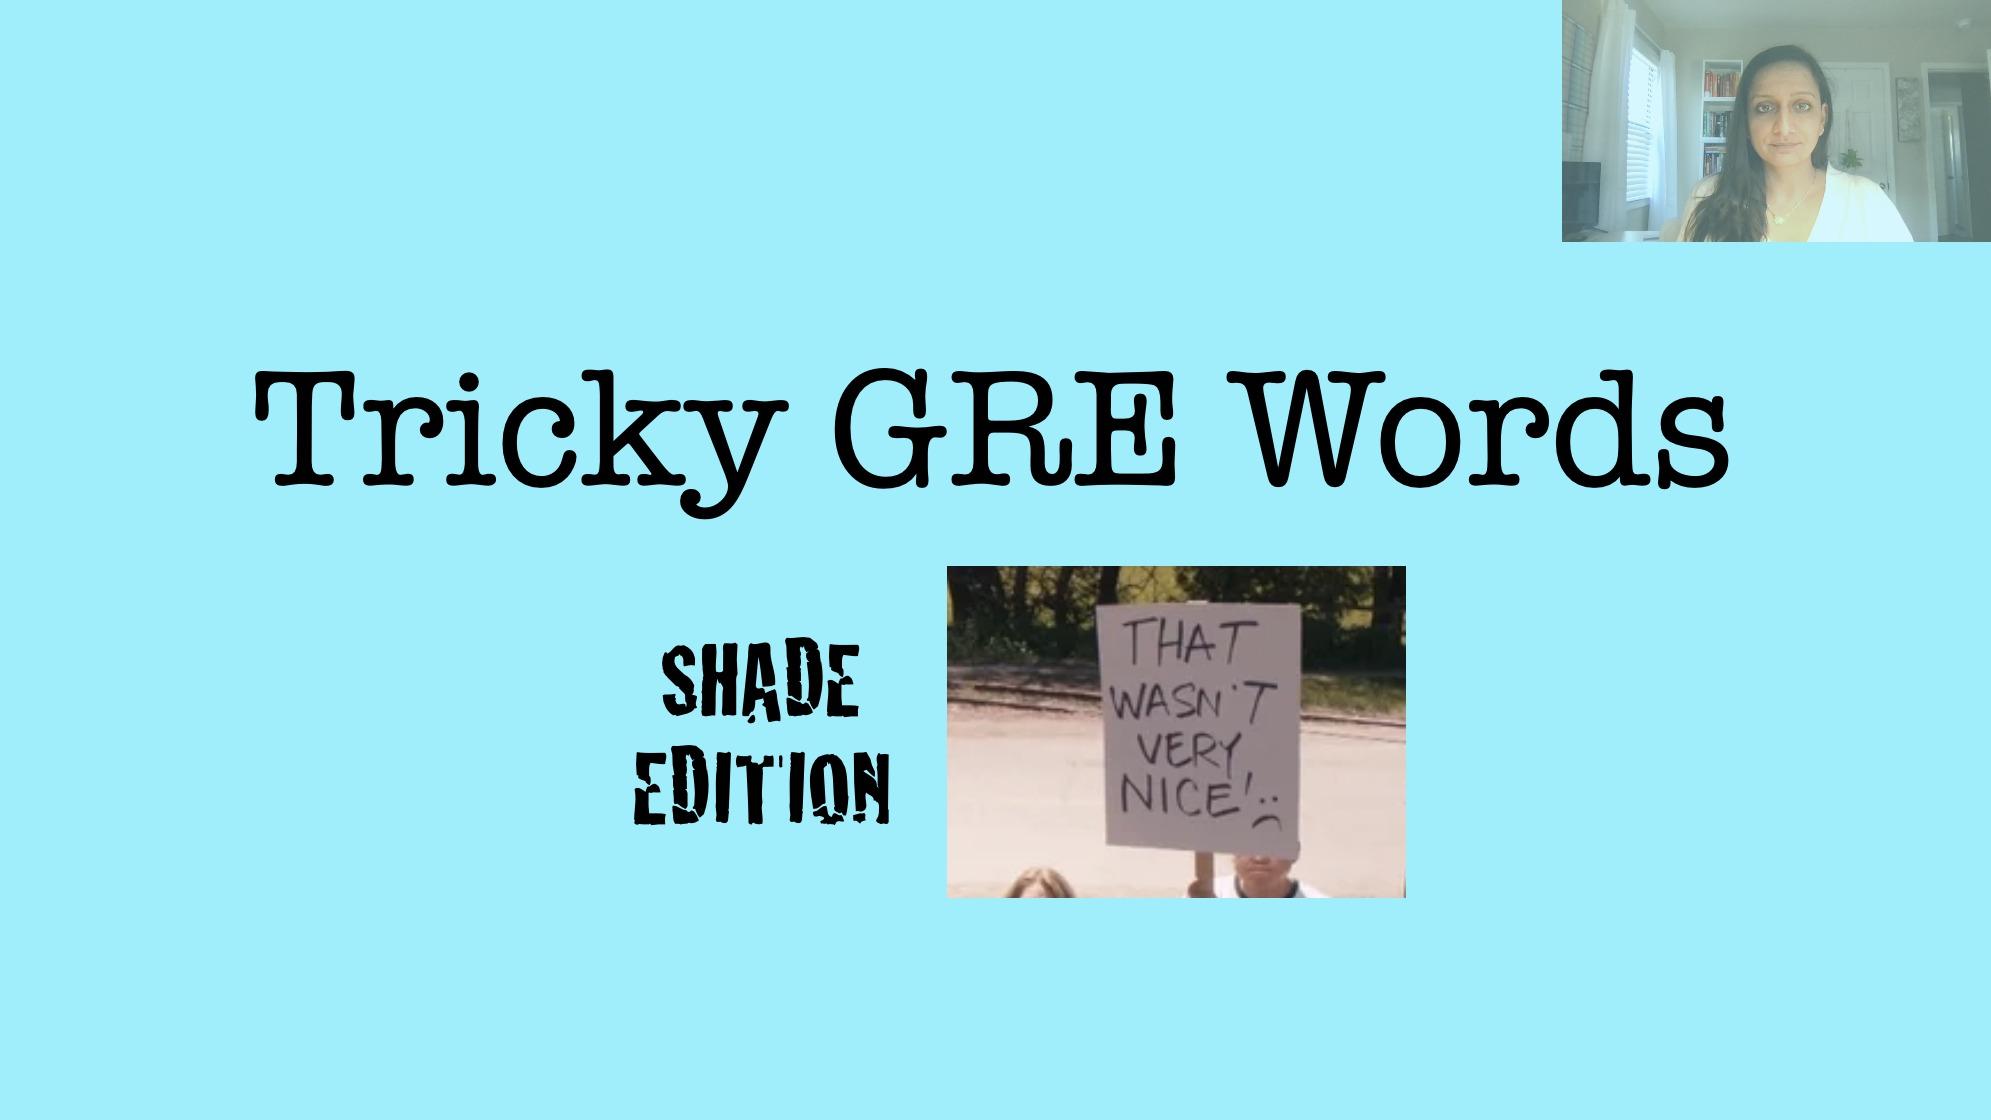 Vocab Club 03: Tricky GRE Words, "Throwing Shade" 